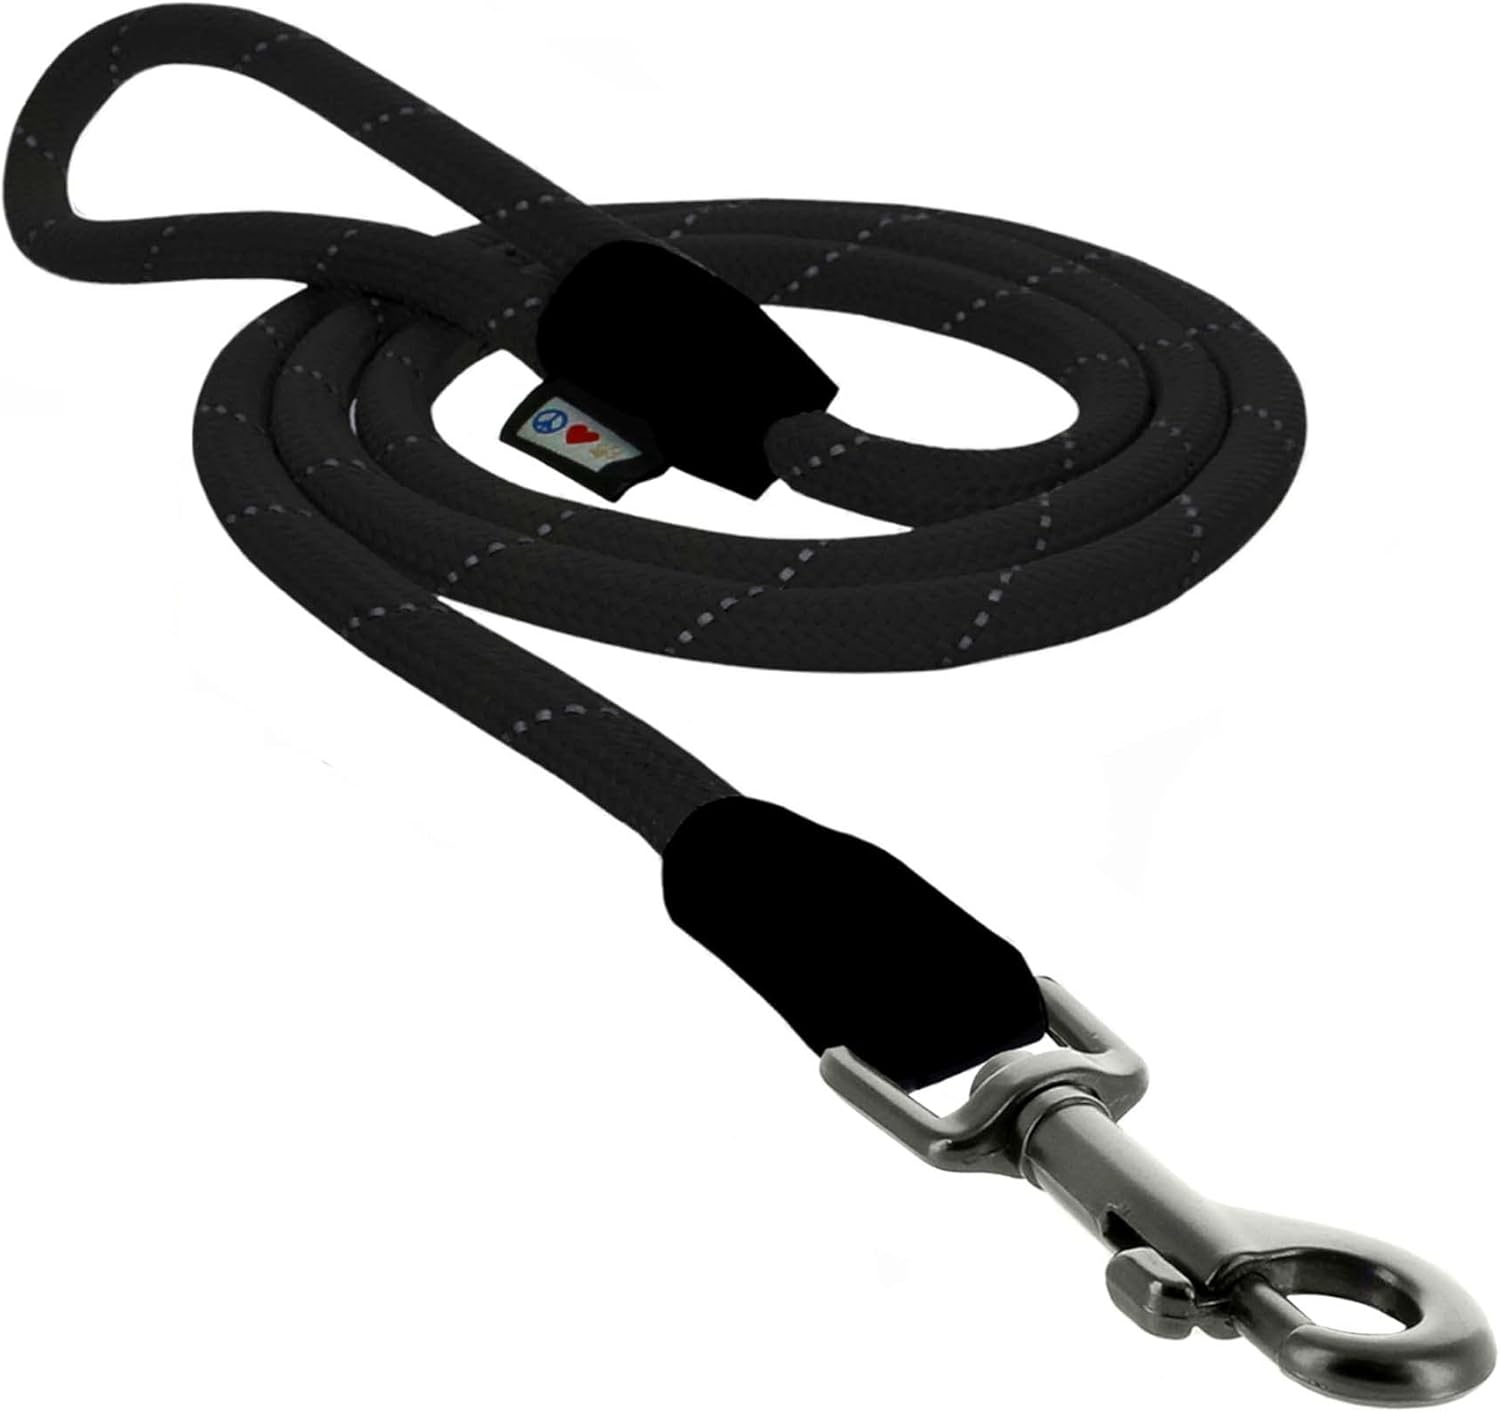 PAWTITAS 1.8 M Training Dog Lead Durable Medium Rope Lead for Dogs Premium Quality Heavy Duty Rope Lead Strong and Comfortable - Black Puppy Lead